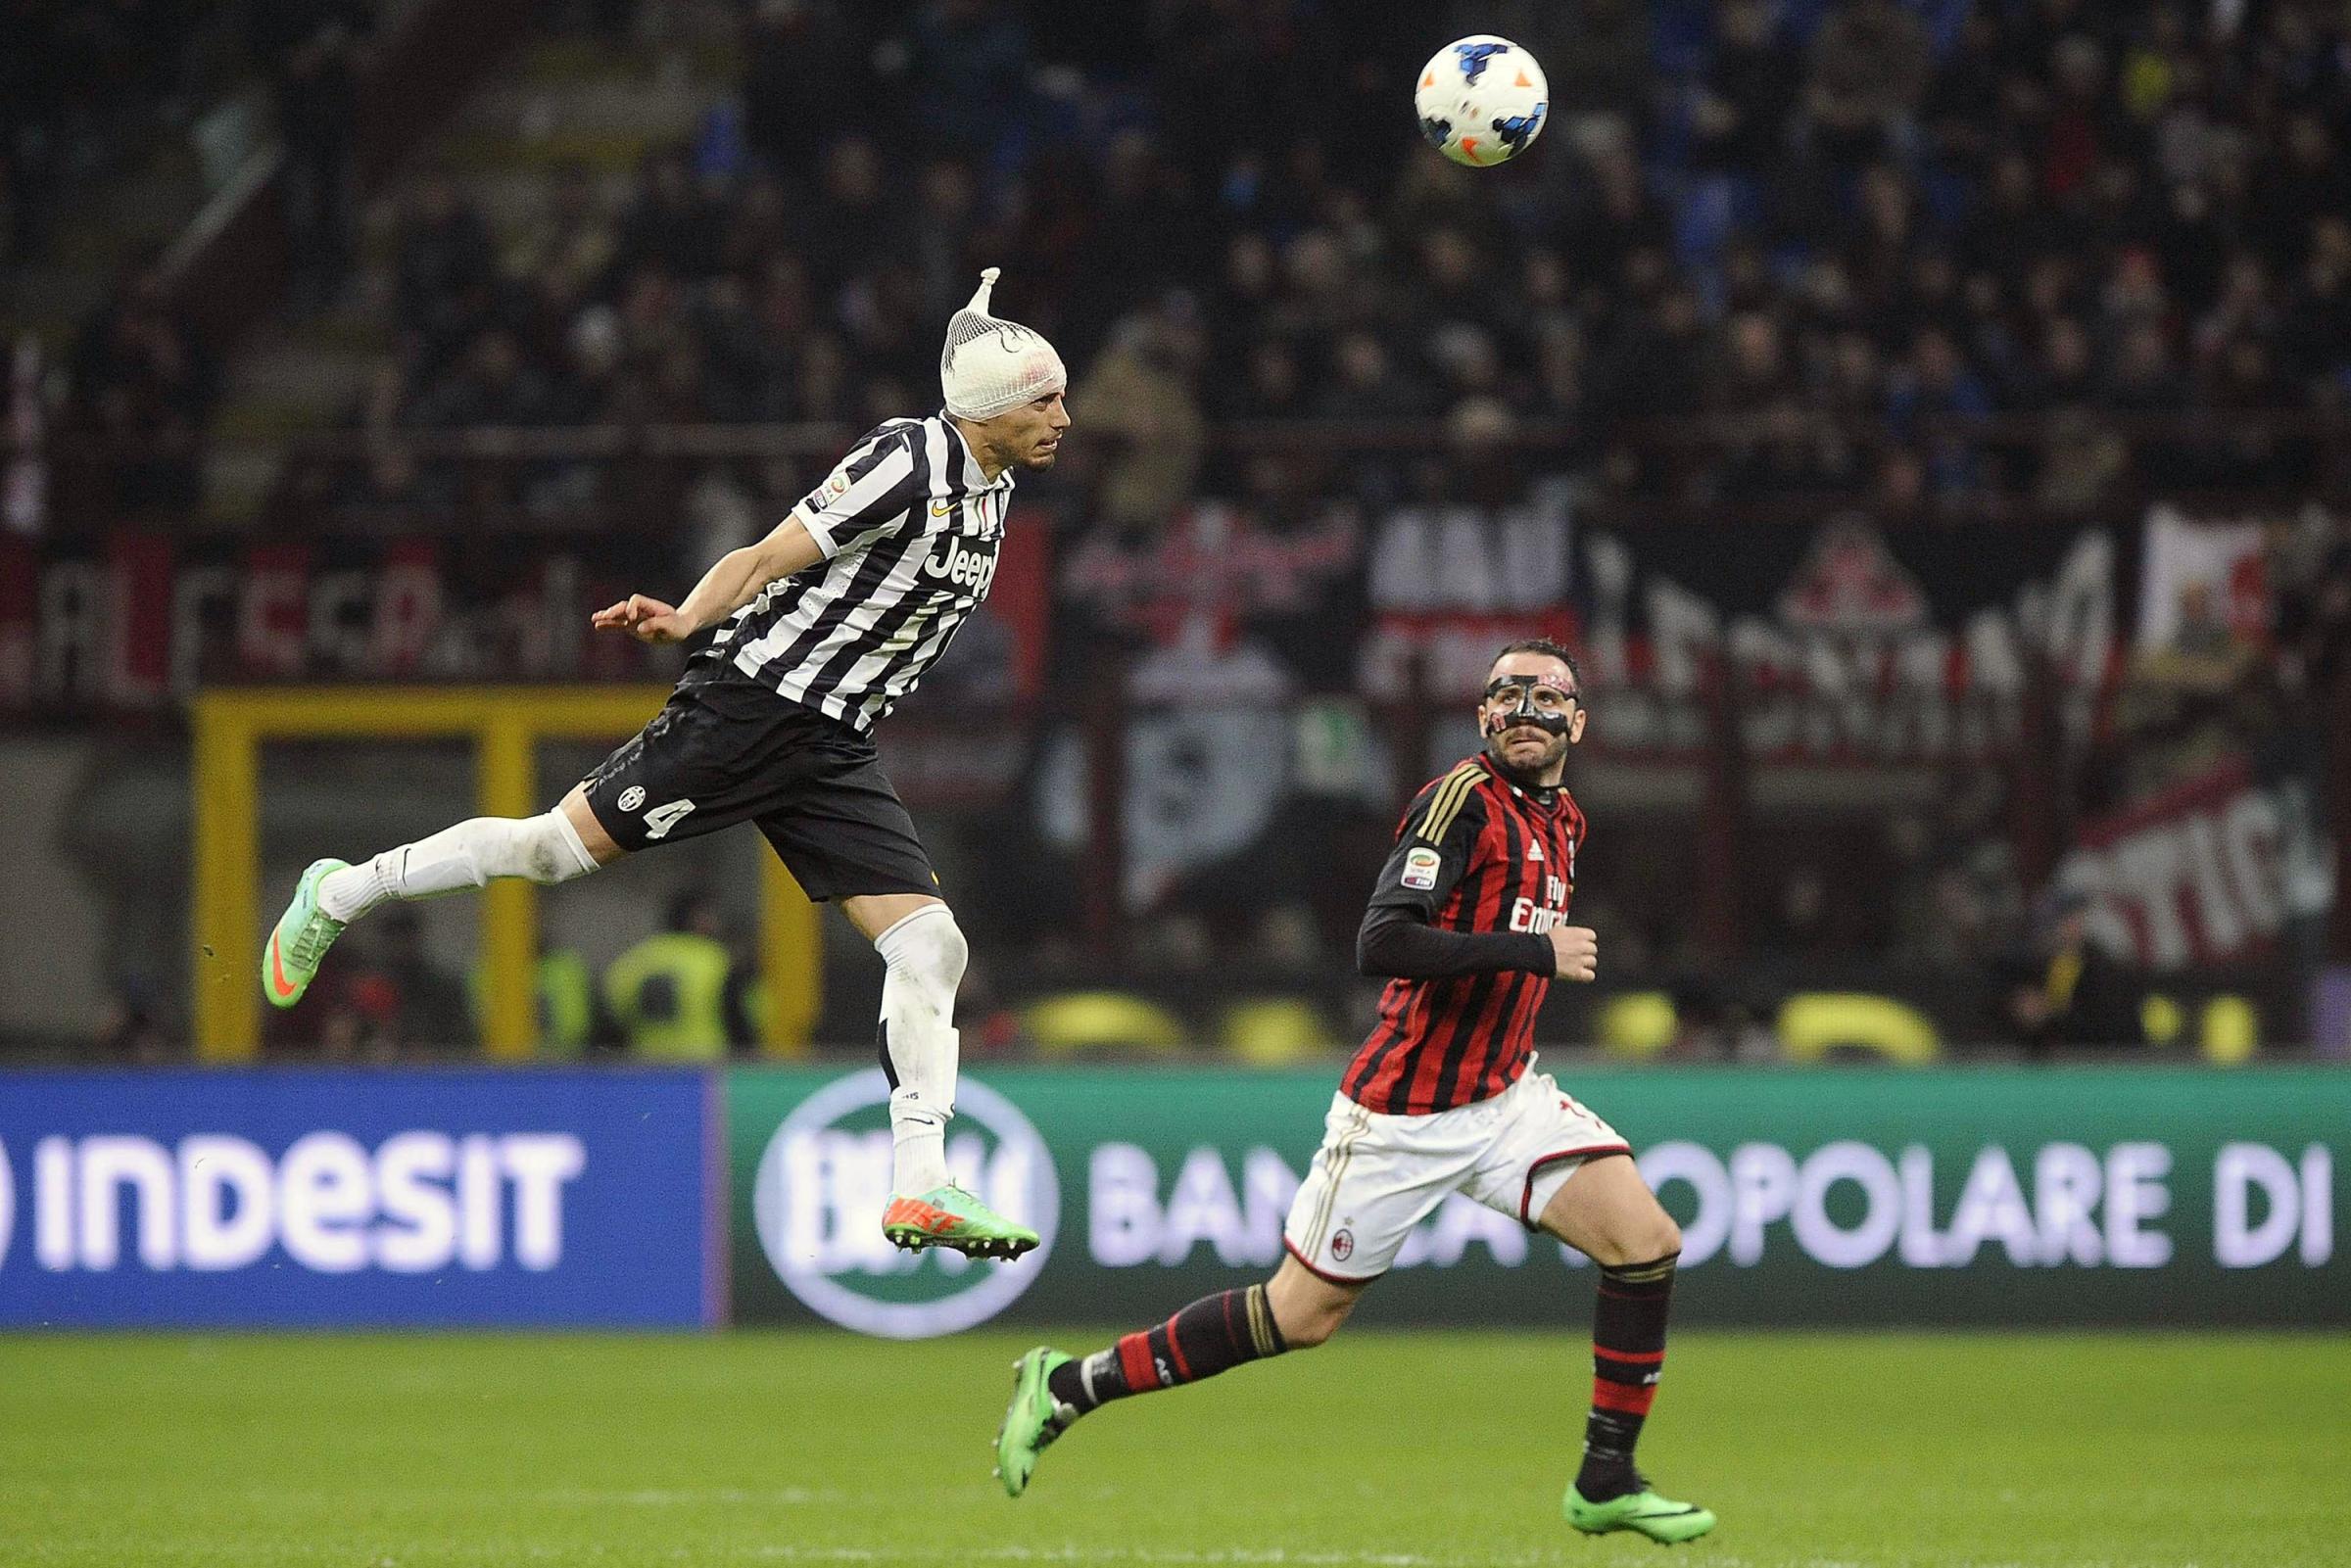 Juventus' Martin Caceres, left, jumps for the ball as AC Milan's Giampaolo Pazzini looks at him during their Italian Serie A soccer match at the San Siro stadium in Milan March 2, 2014.